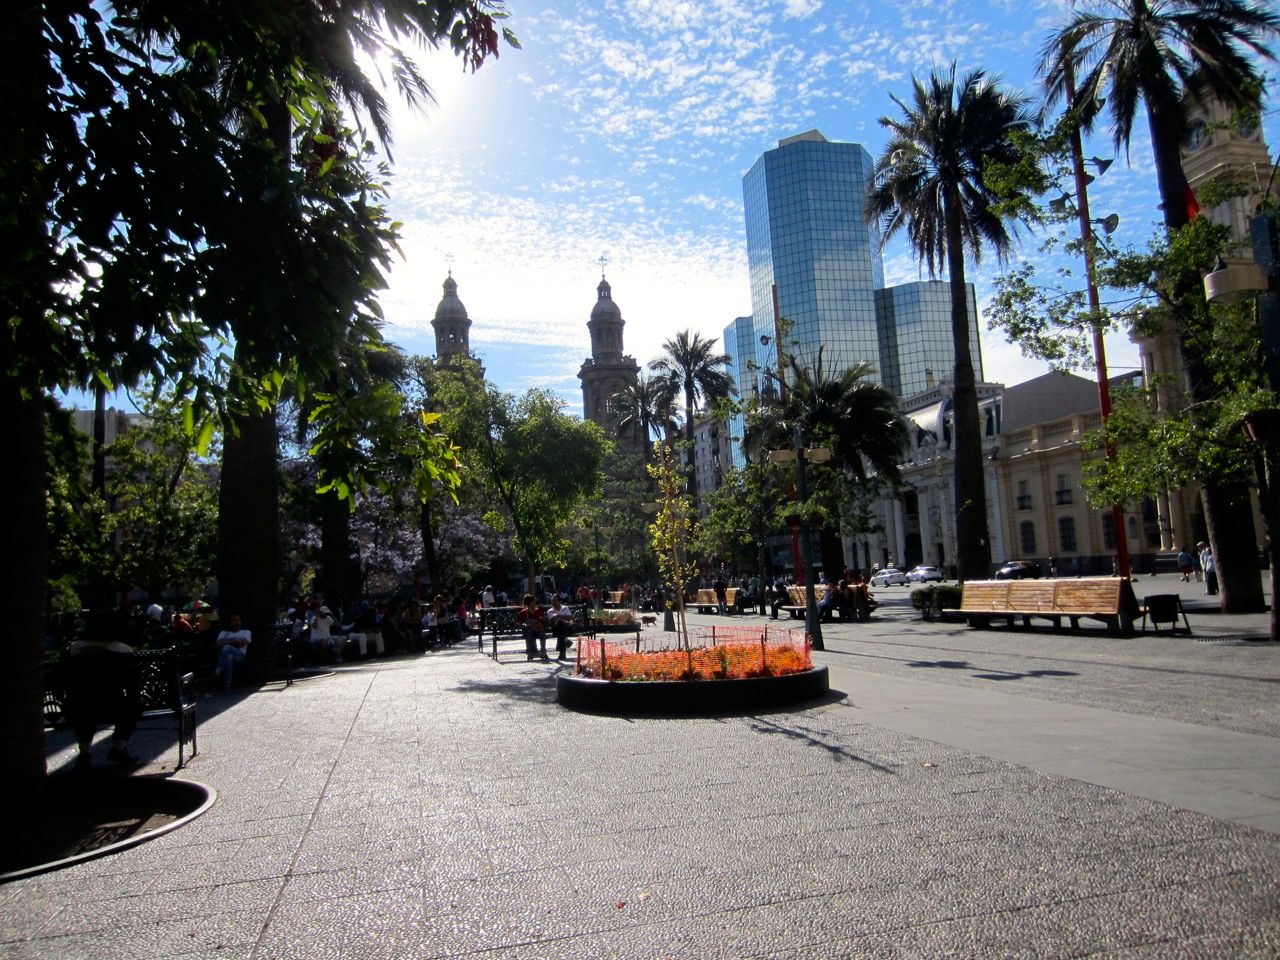 A city square with buildings in the background.